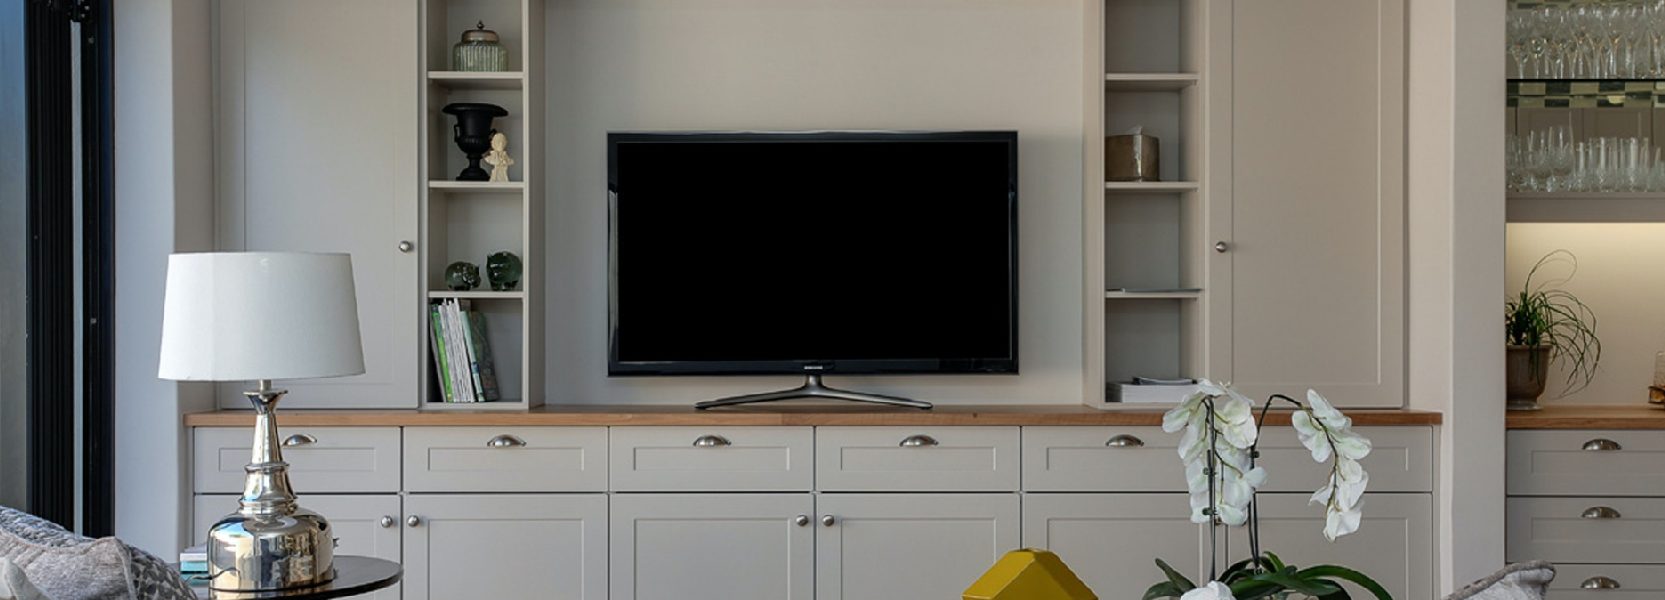 tv sitting on a tv stand in a living room surrounded by lamps and cupboards